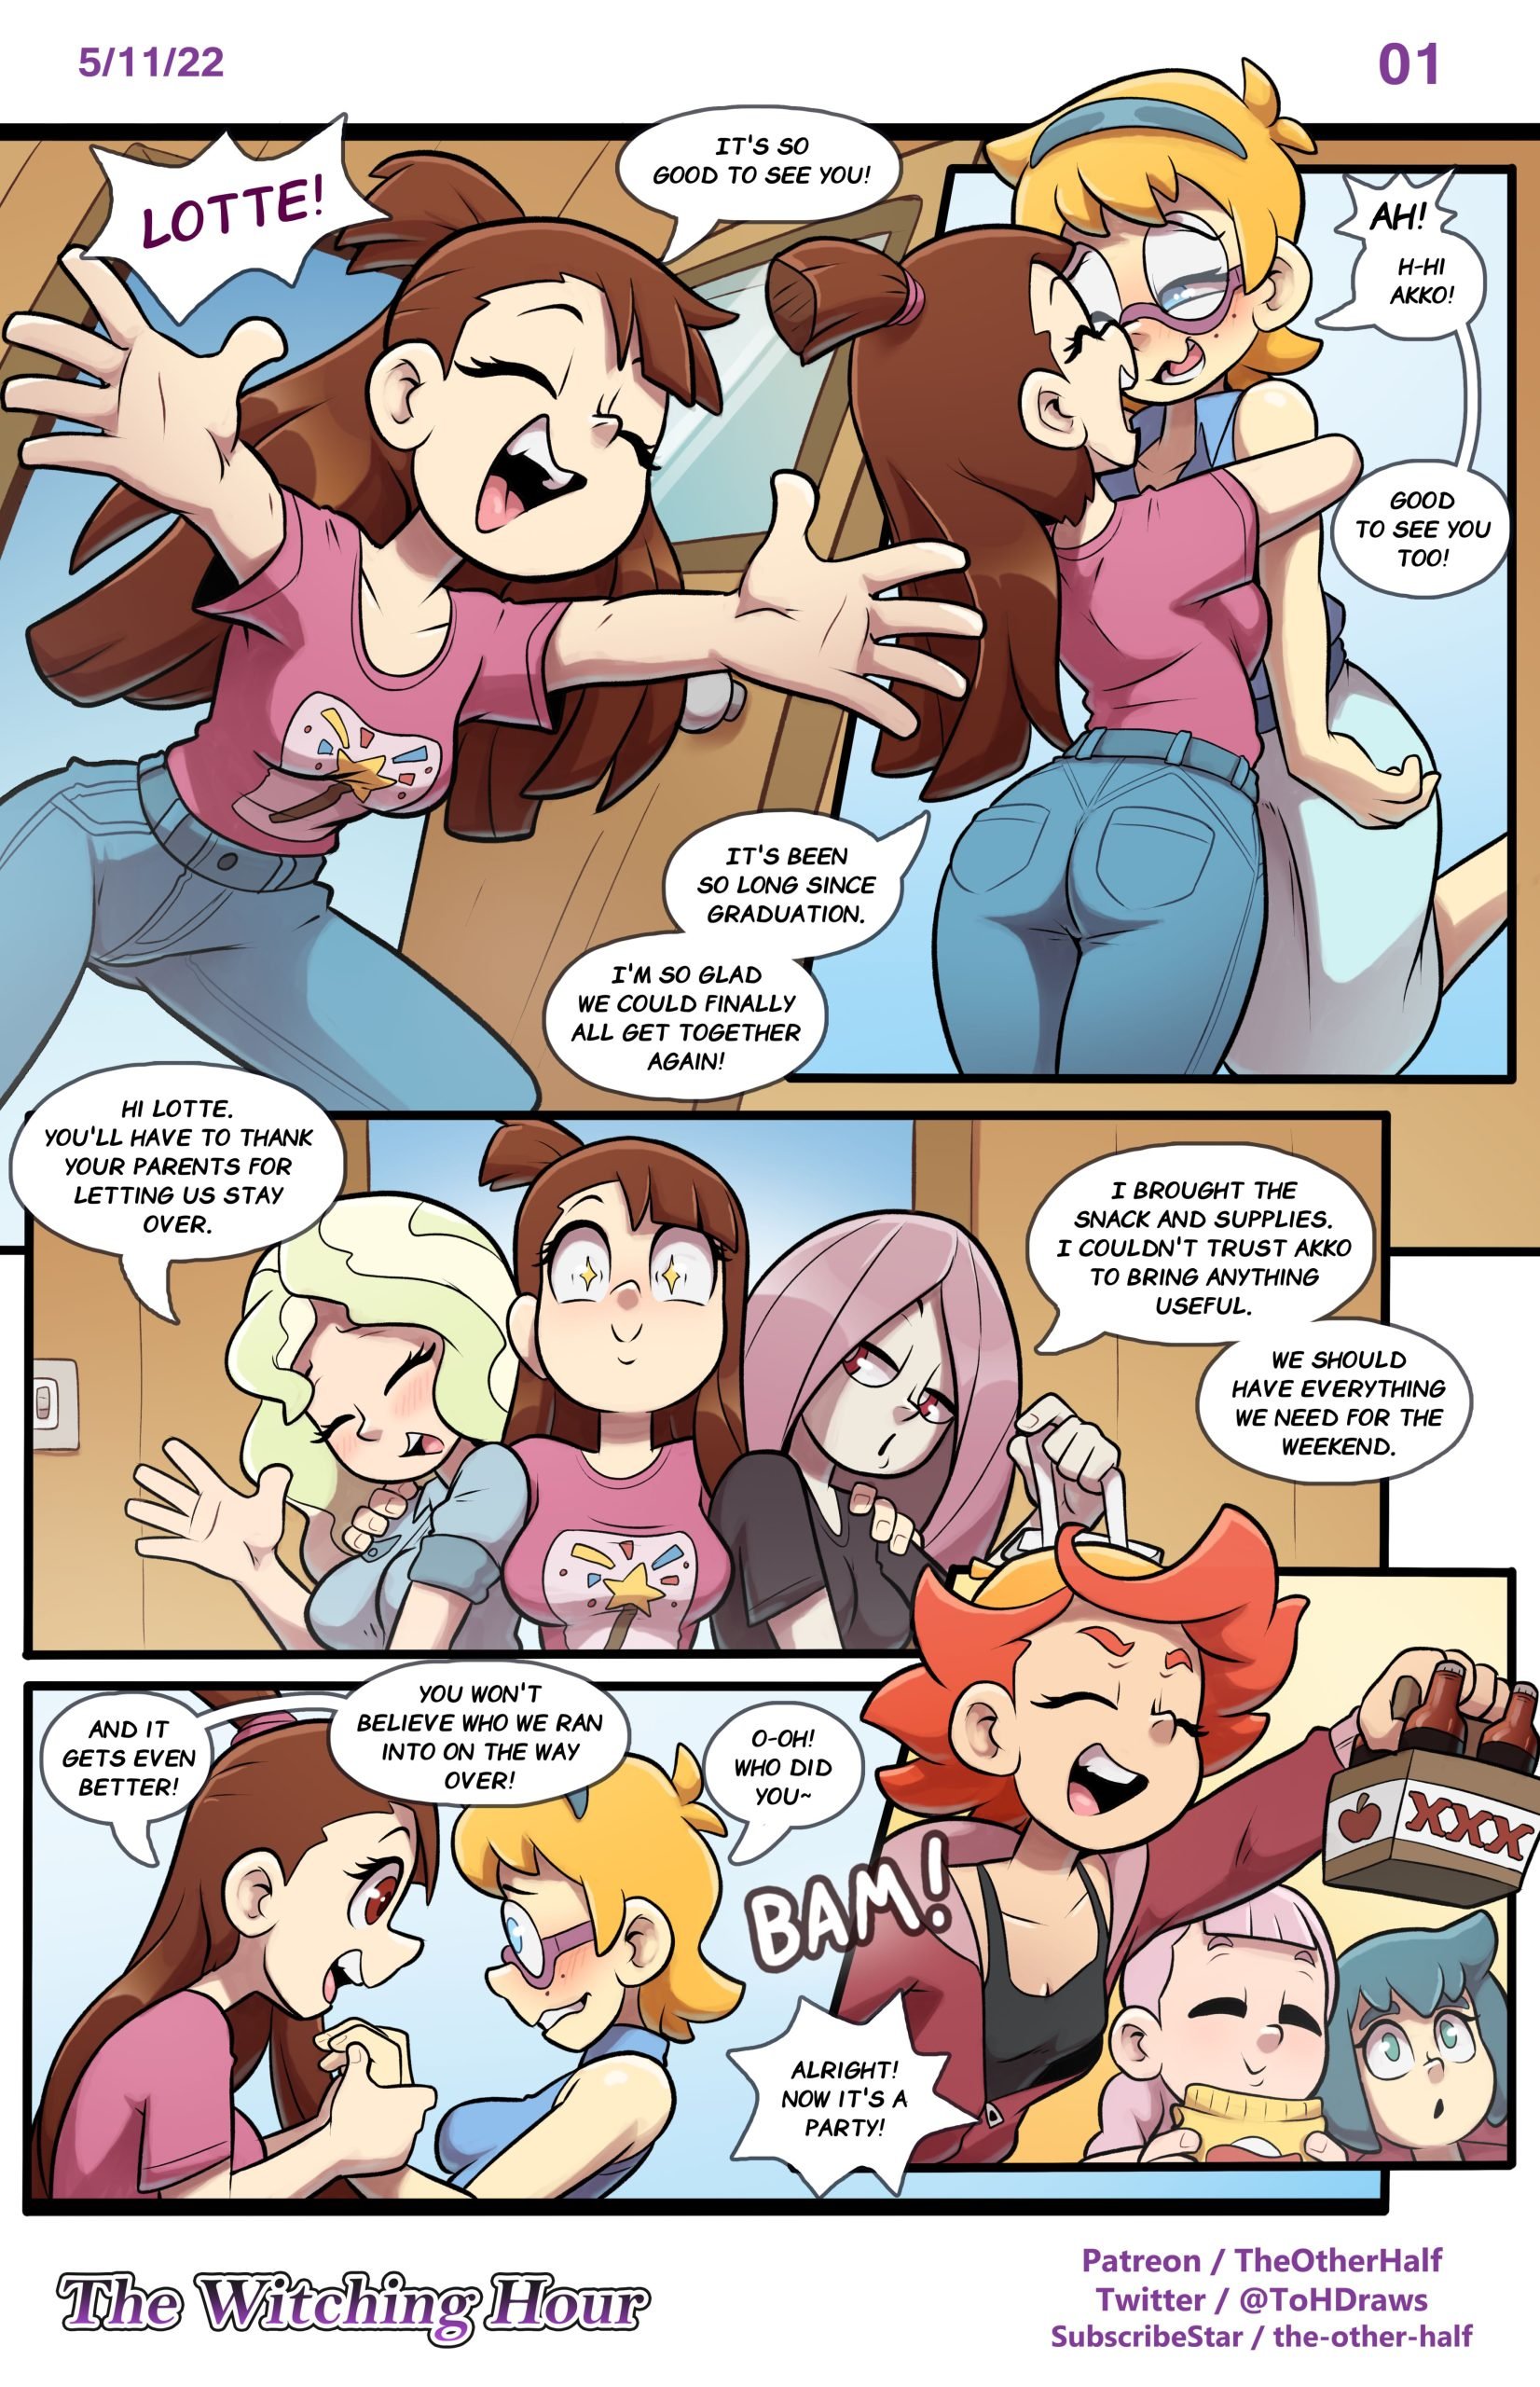 The Witching Hour (Little Witch Academia) TheOtherHalf Porn Comic picture picture